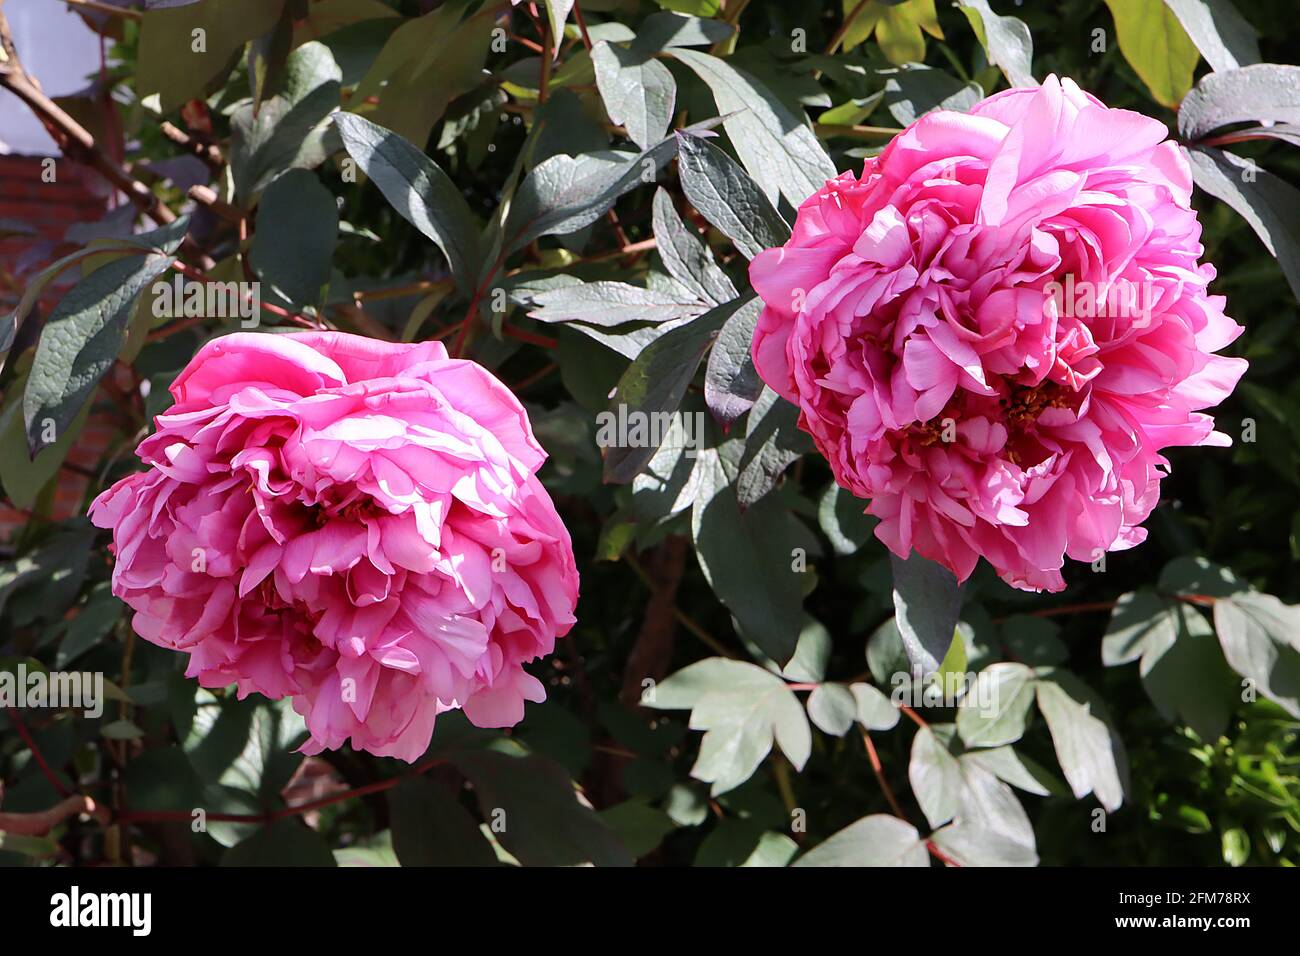 Paeonia lactiflora ‘Sarah Bernhardt’ Peony Sarah Bernhardt – enormous rose pink double flowers and large divided leaves,  May, England, UK Stock Photo